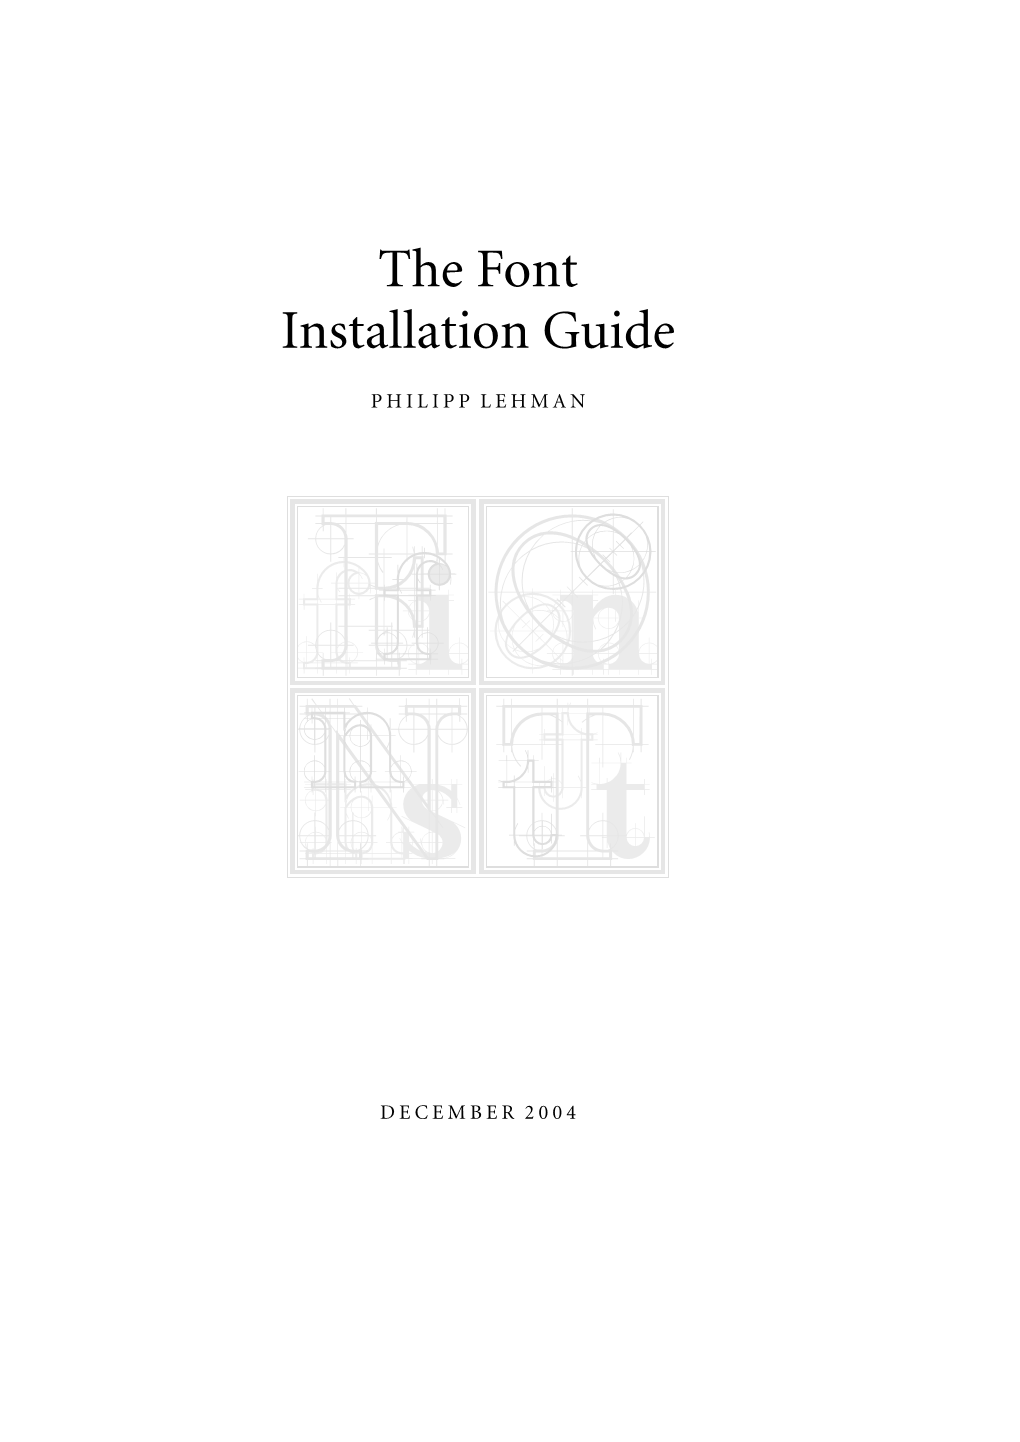 The Font Installation Guide